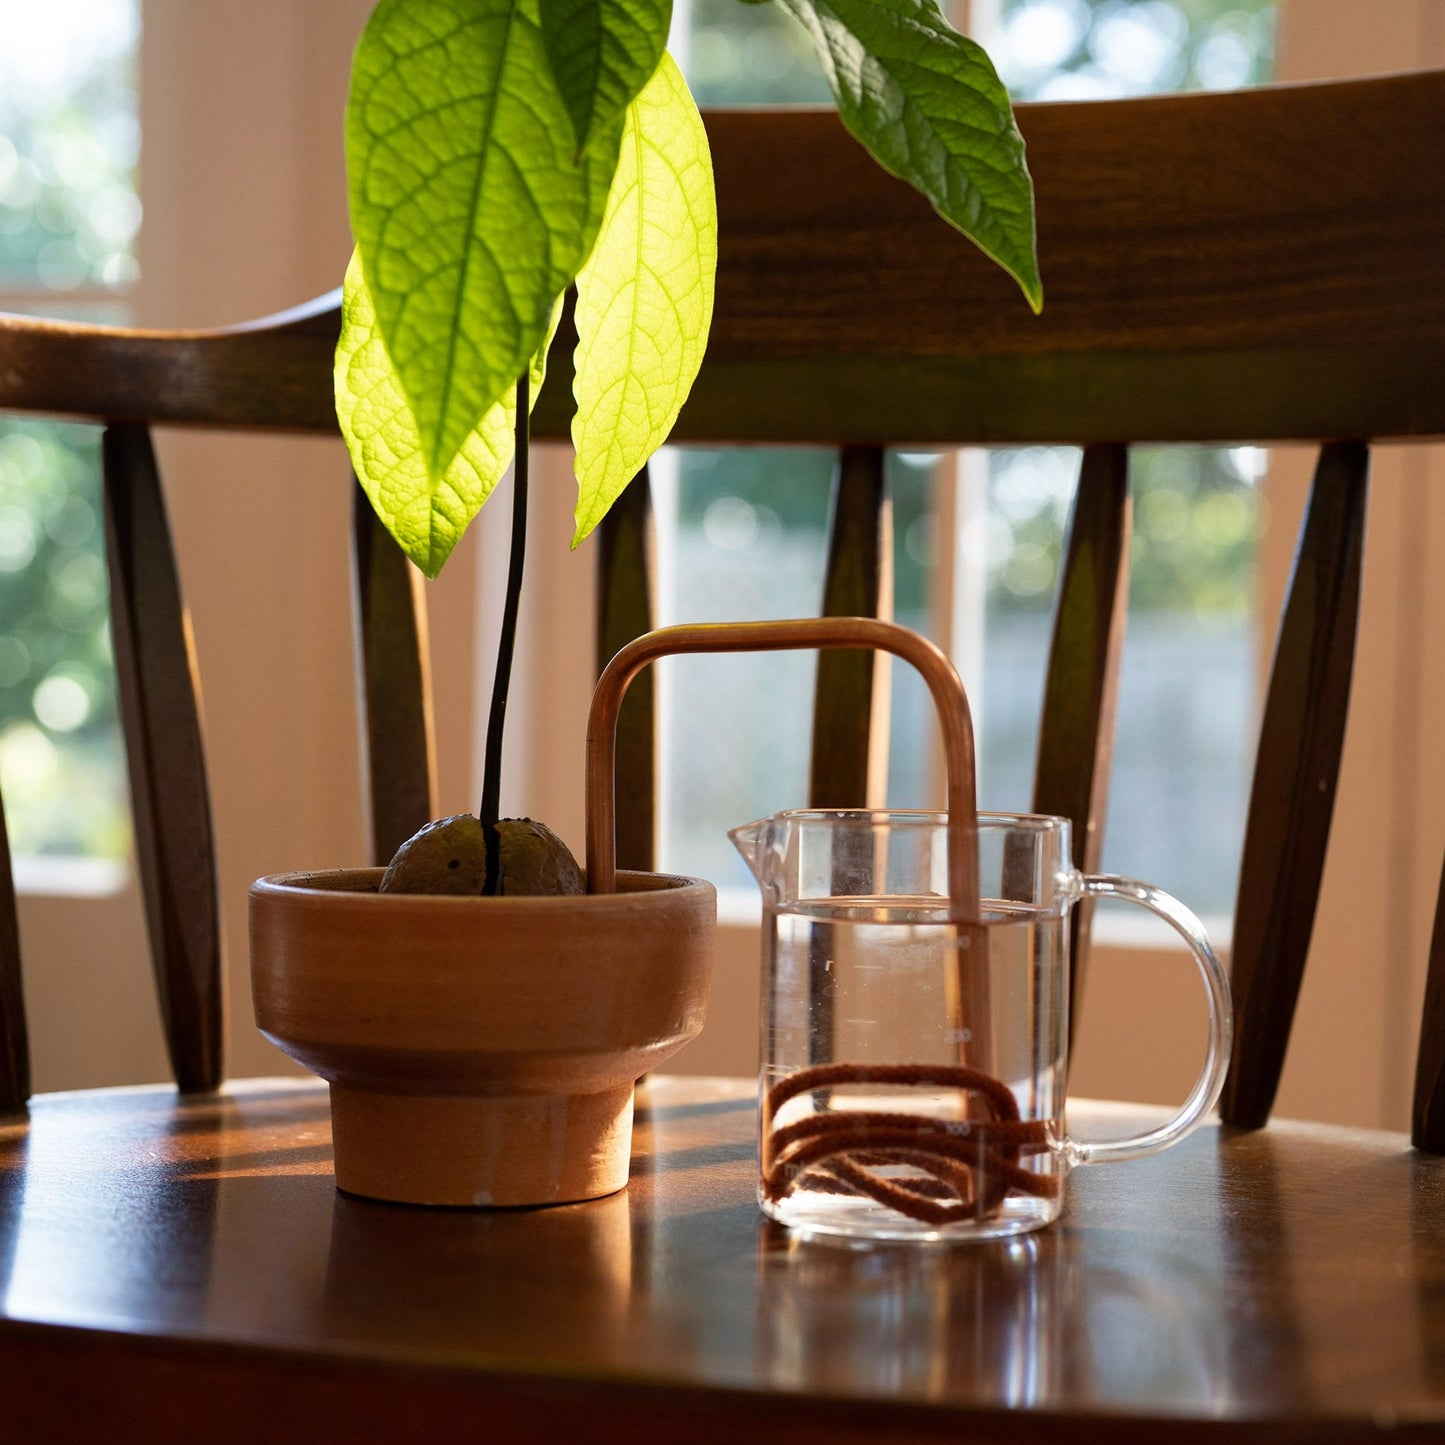 Plant Self Watering System